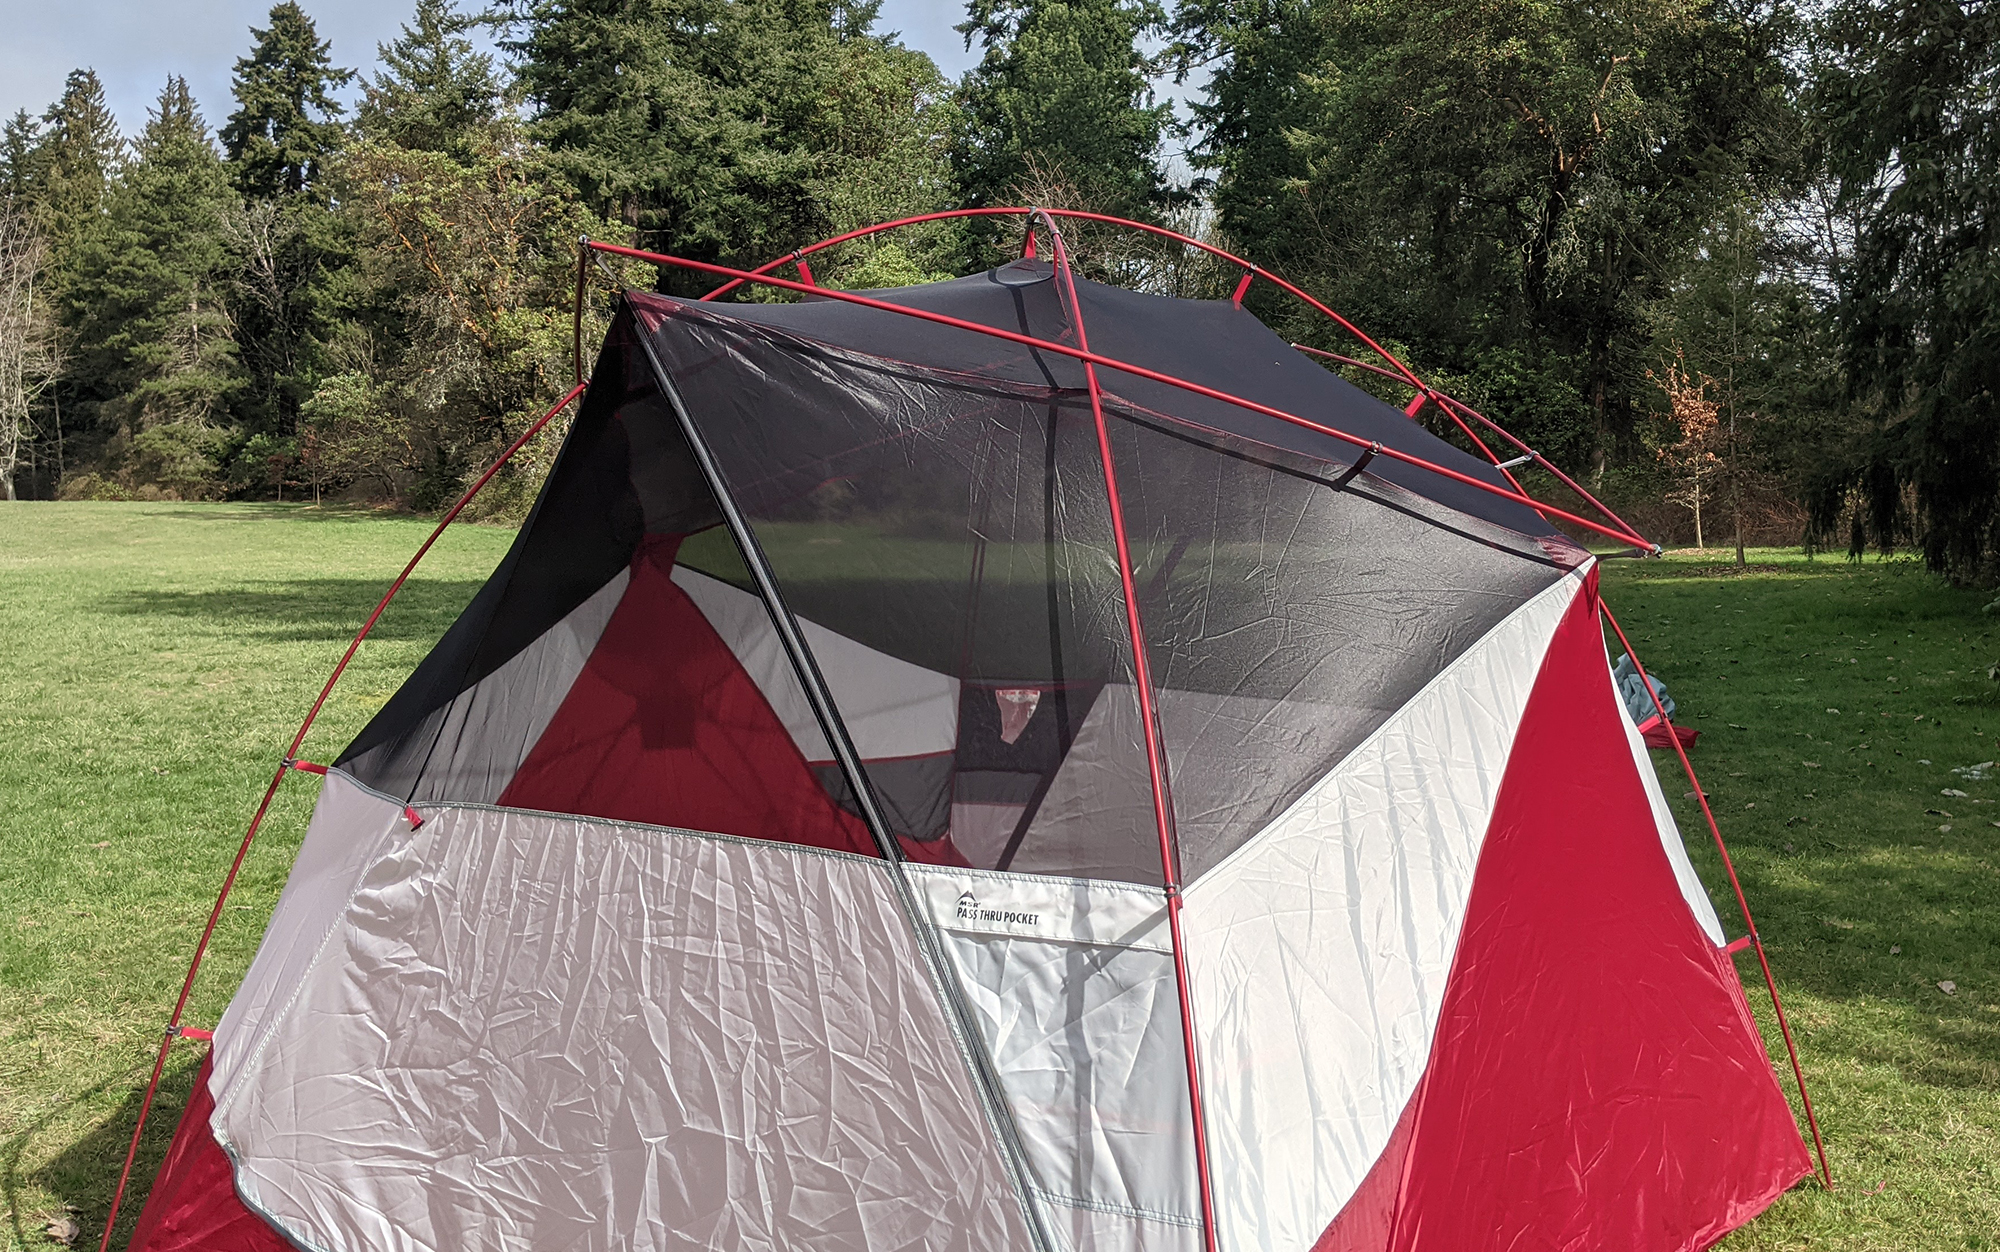 The four additional poles at the top of the MSR Habiscape added to the structural integrity of this tent without increasing the difficulty of setup.